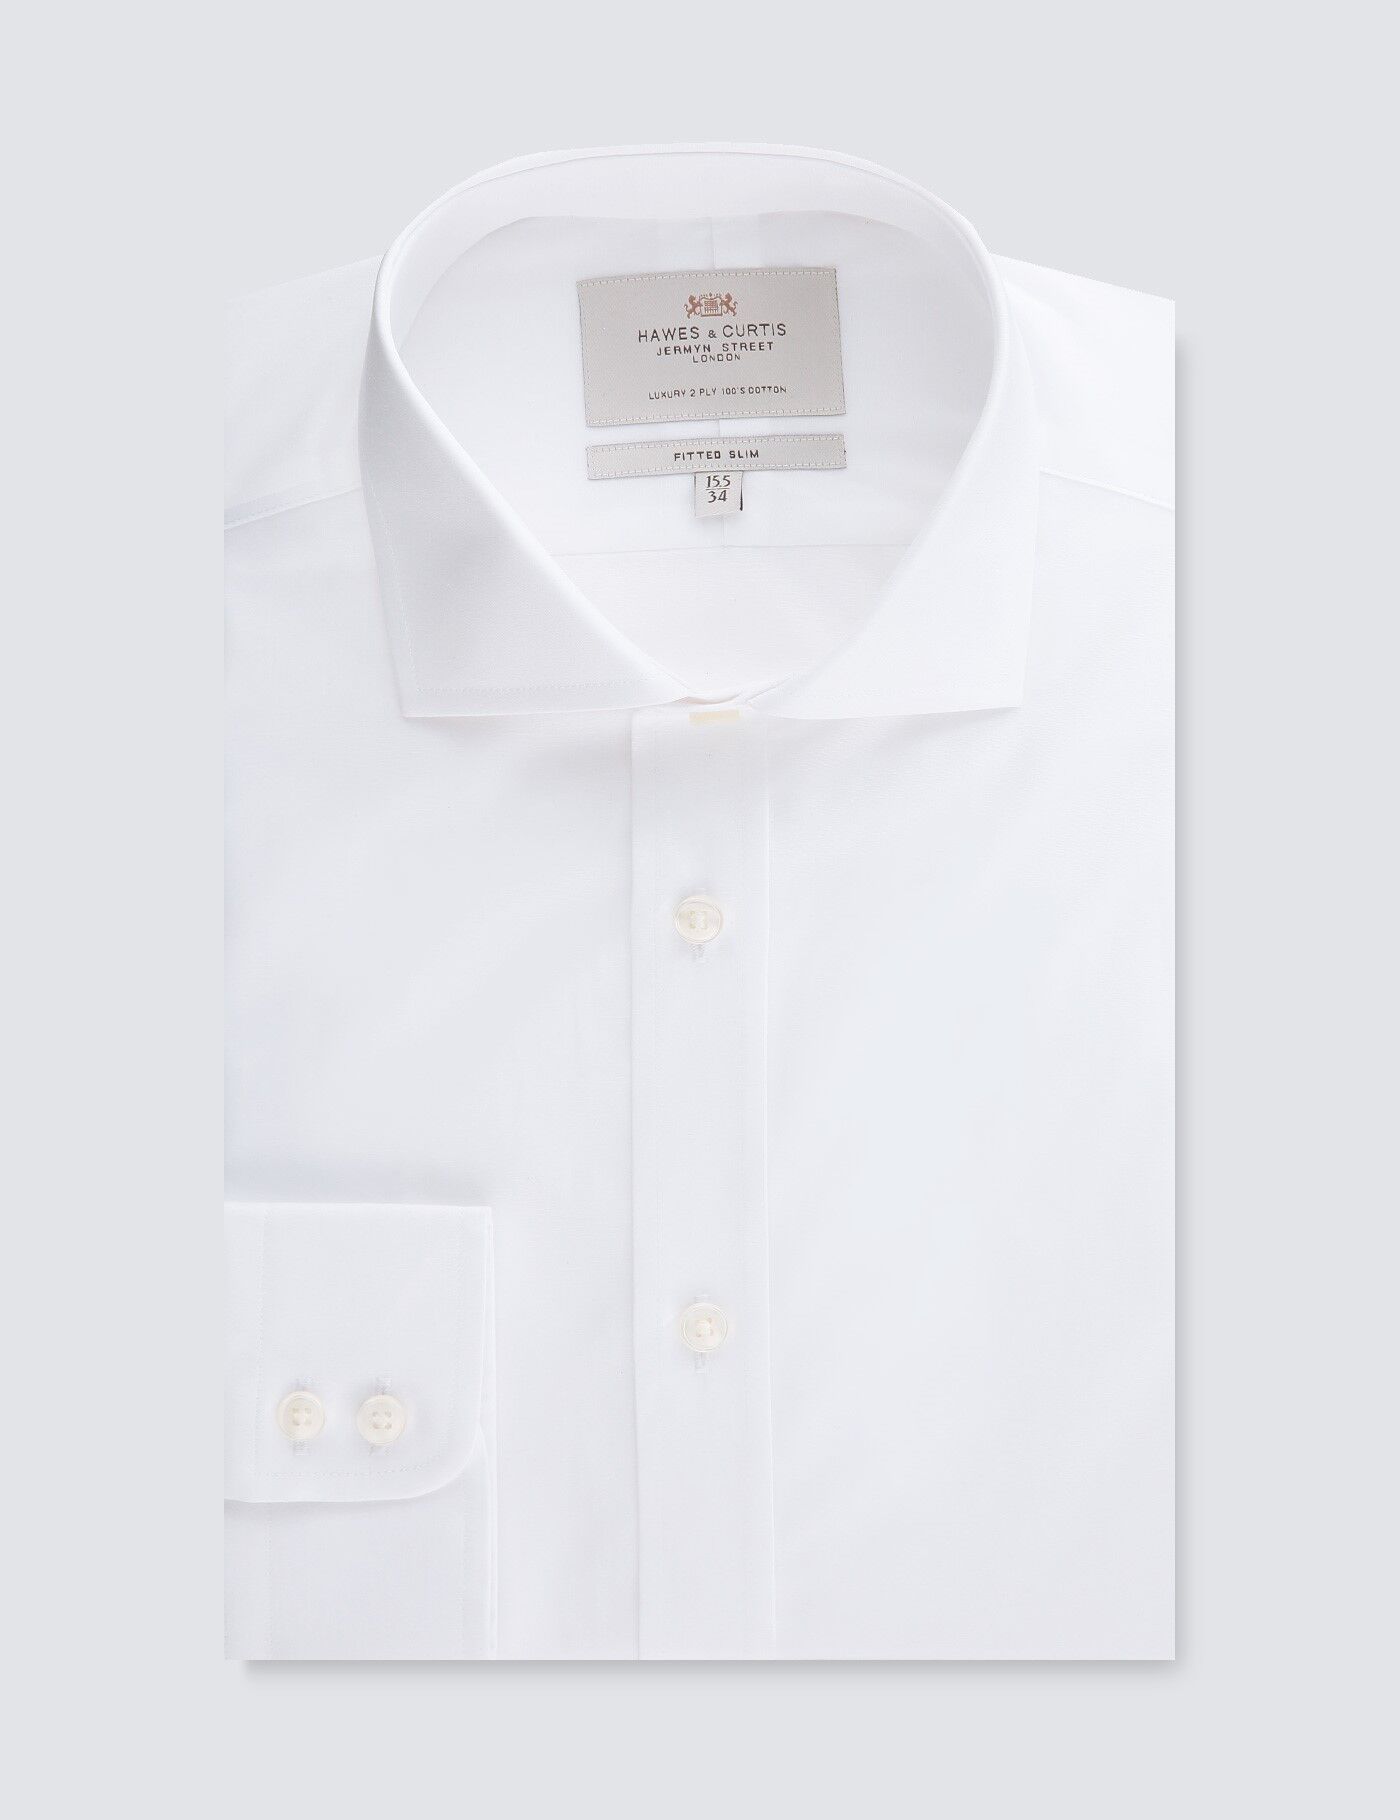 Hawes & Curtis Men's Business Formal Poplin Fitted Slim Dress Shirt in White   Size 15.5/36   Windsor Collar   Single Cuff   Easy Iron   Hawes & Curtis